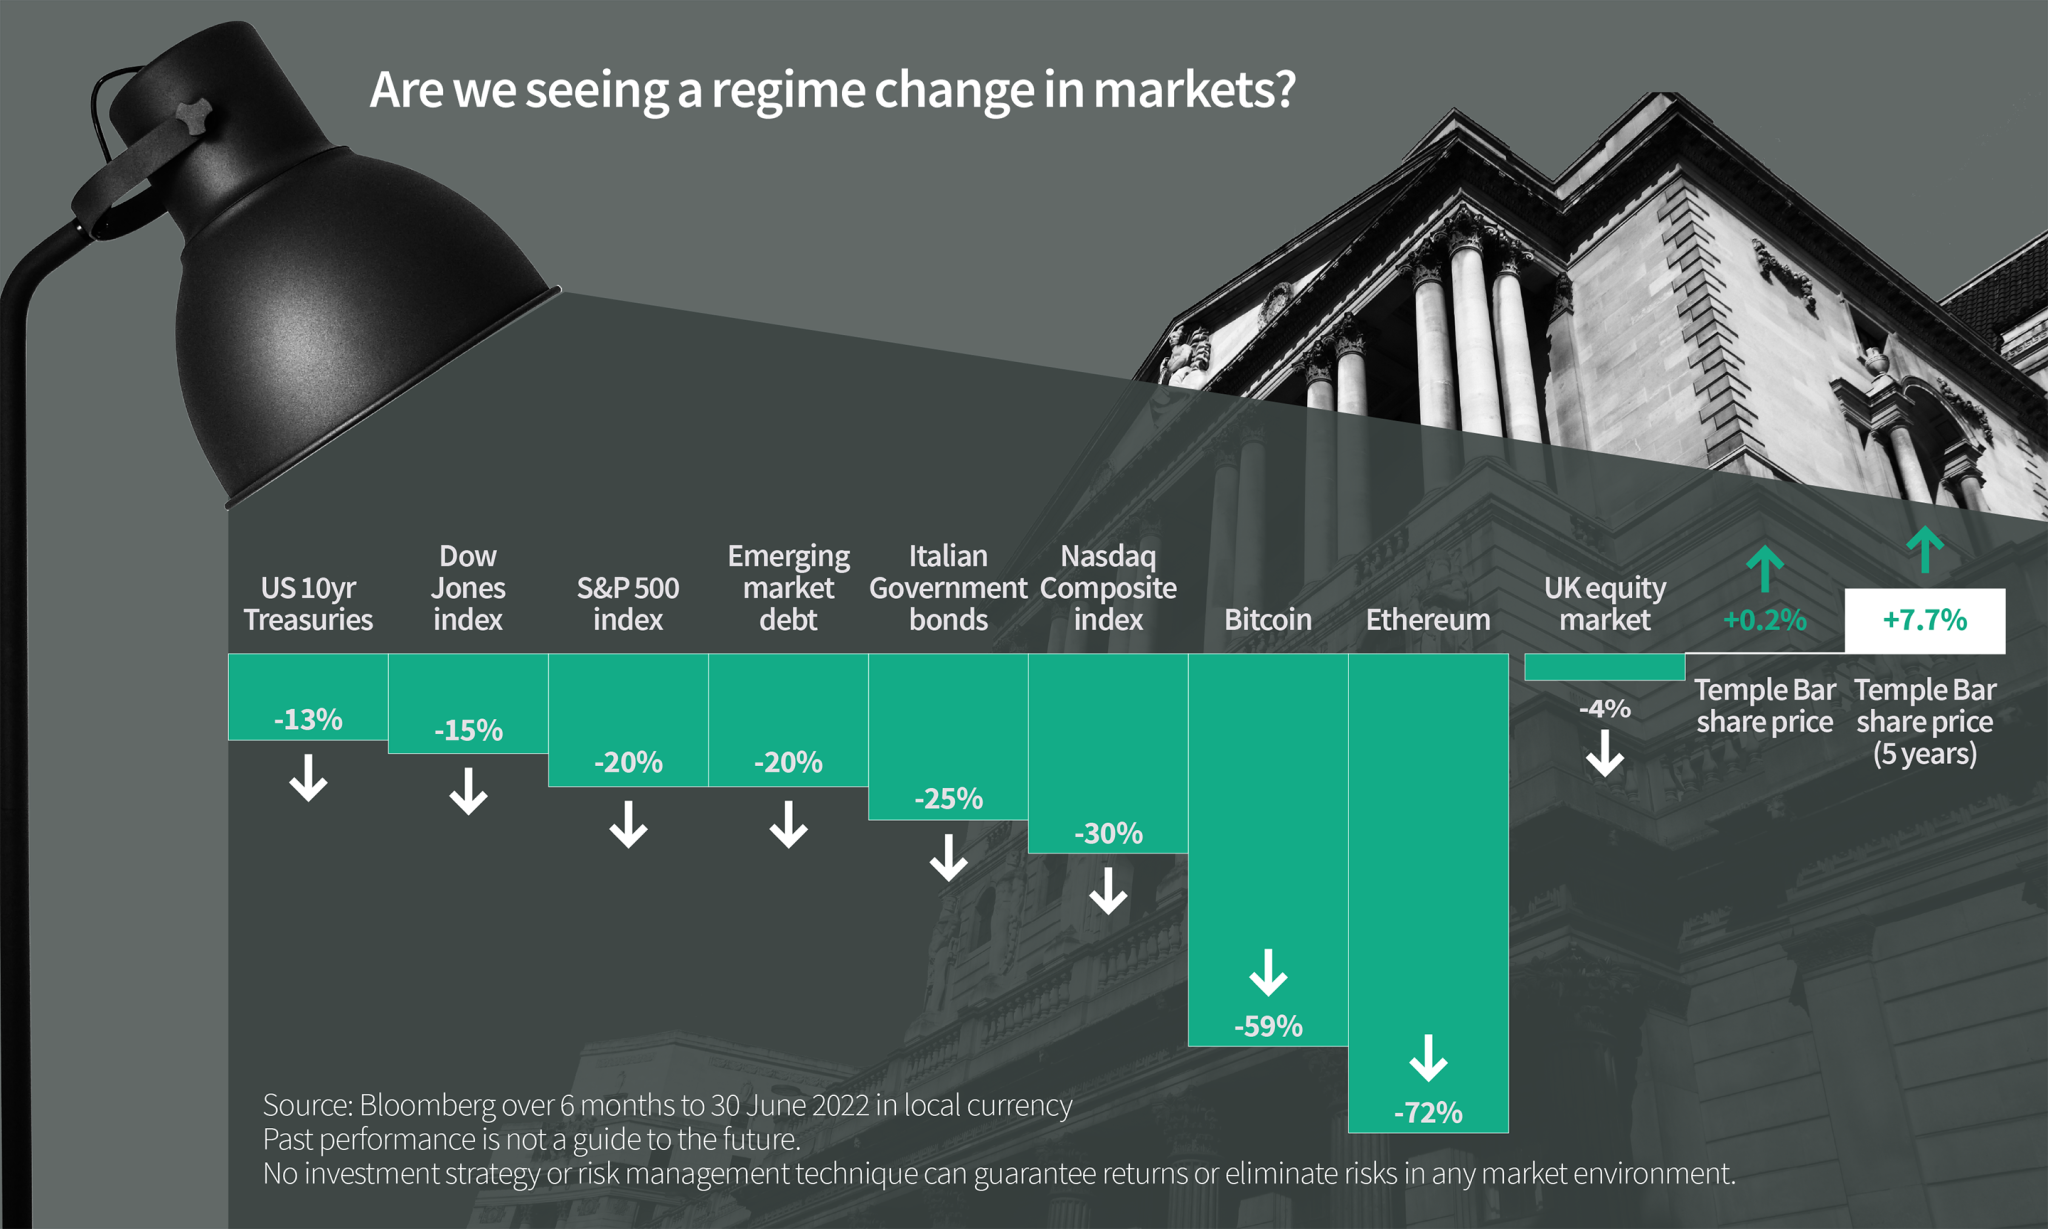 Are we seeing a regime change in markets?